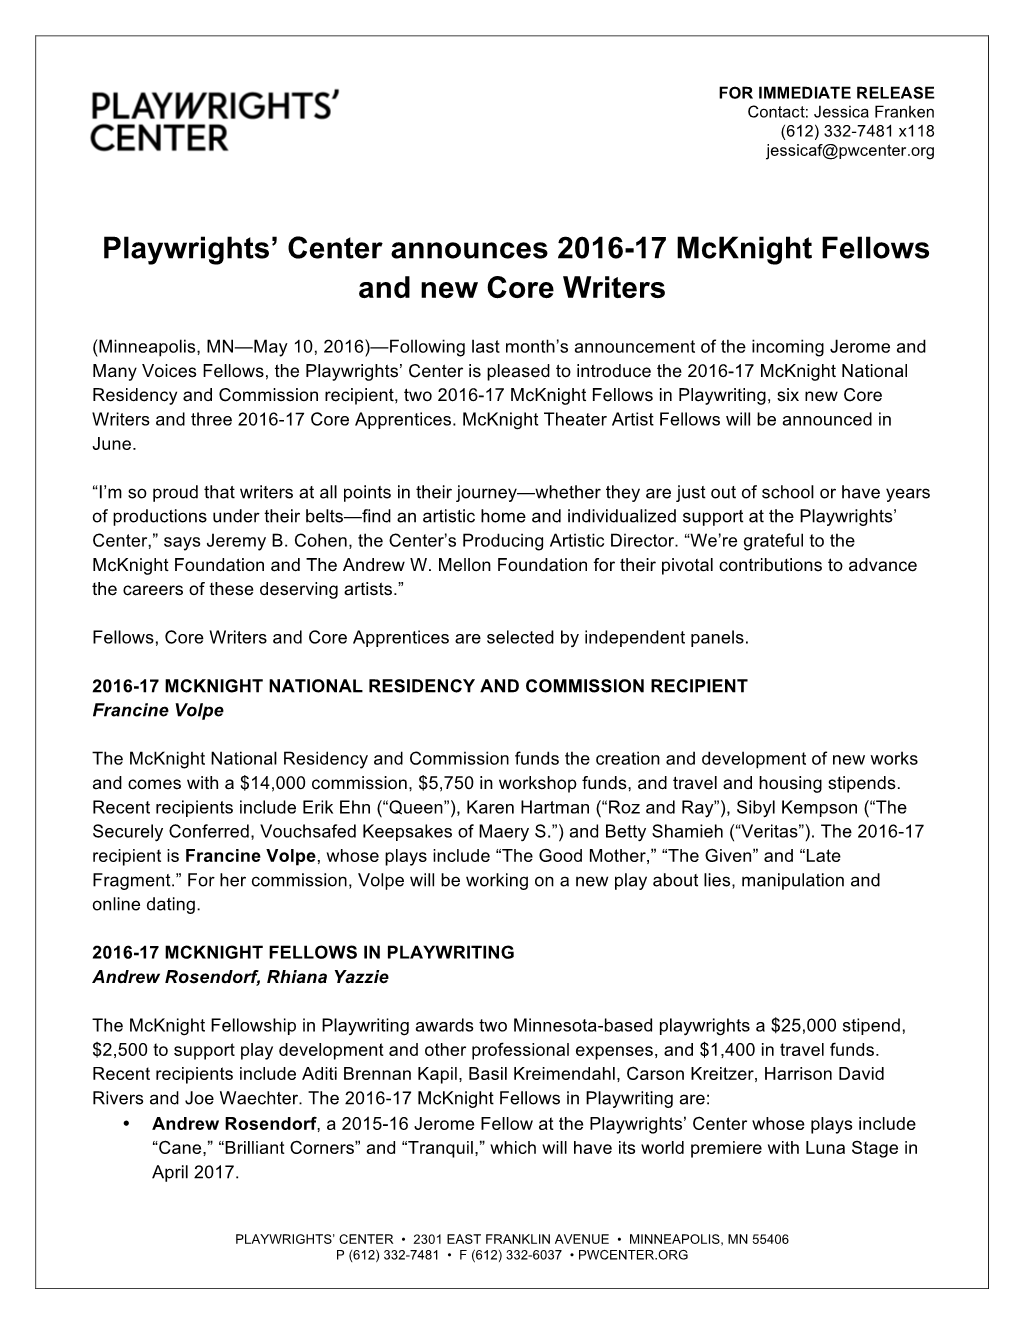 Playwrights' Center Announces 2016-17 Mcknight Fellows and New